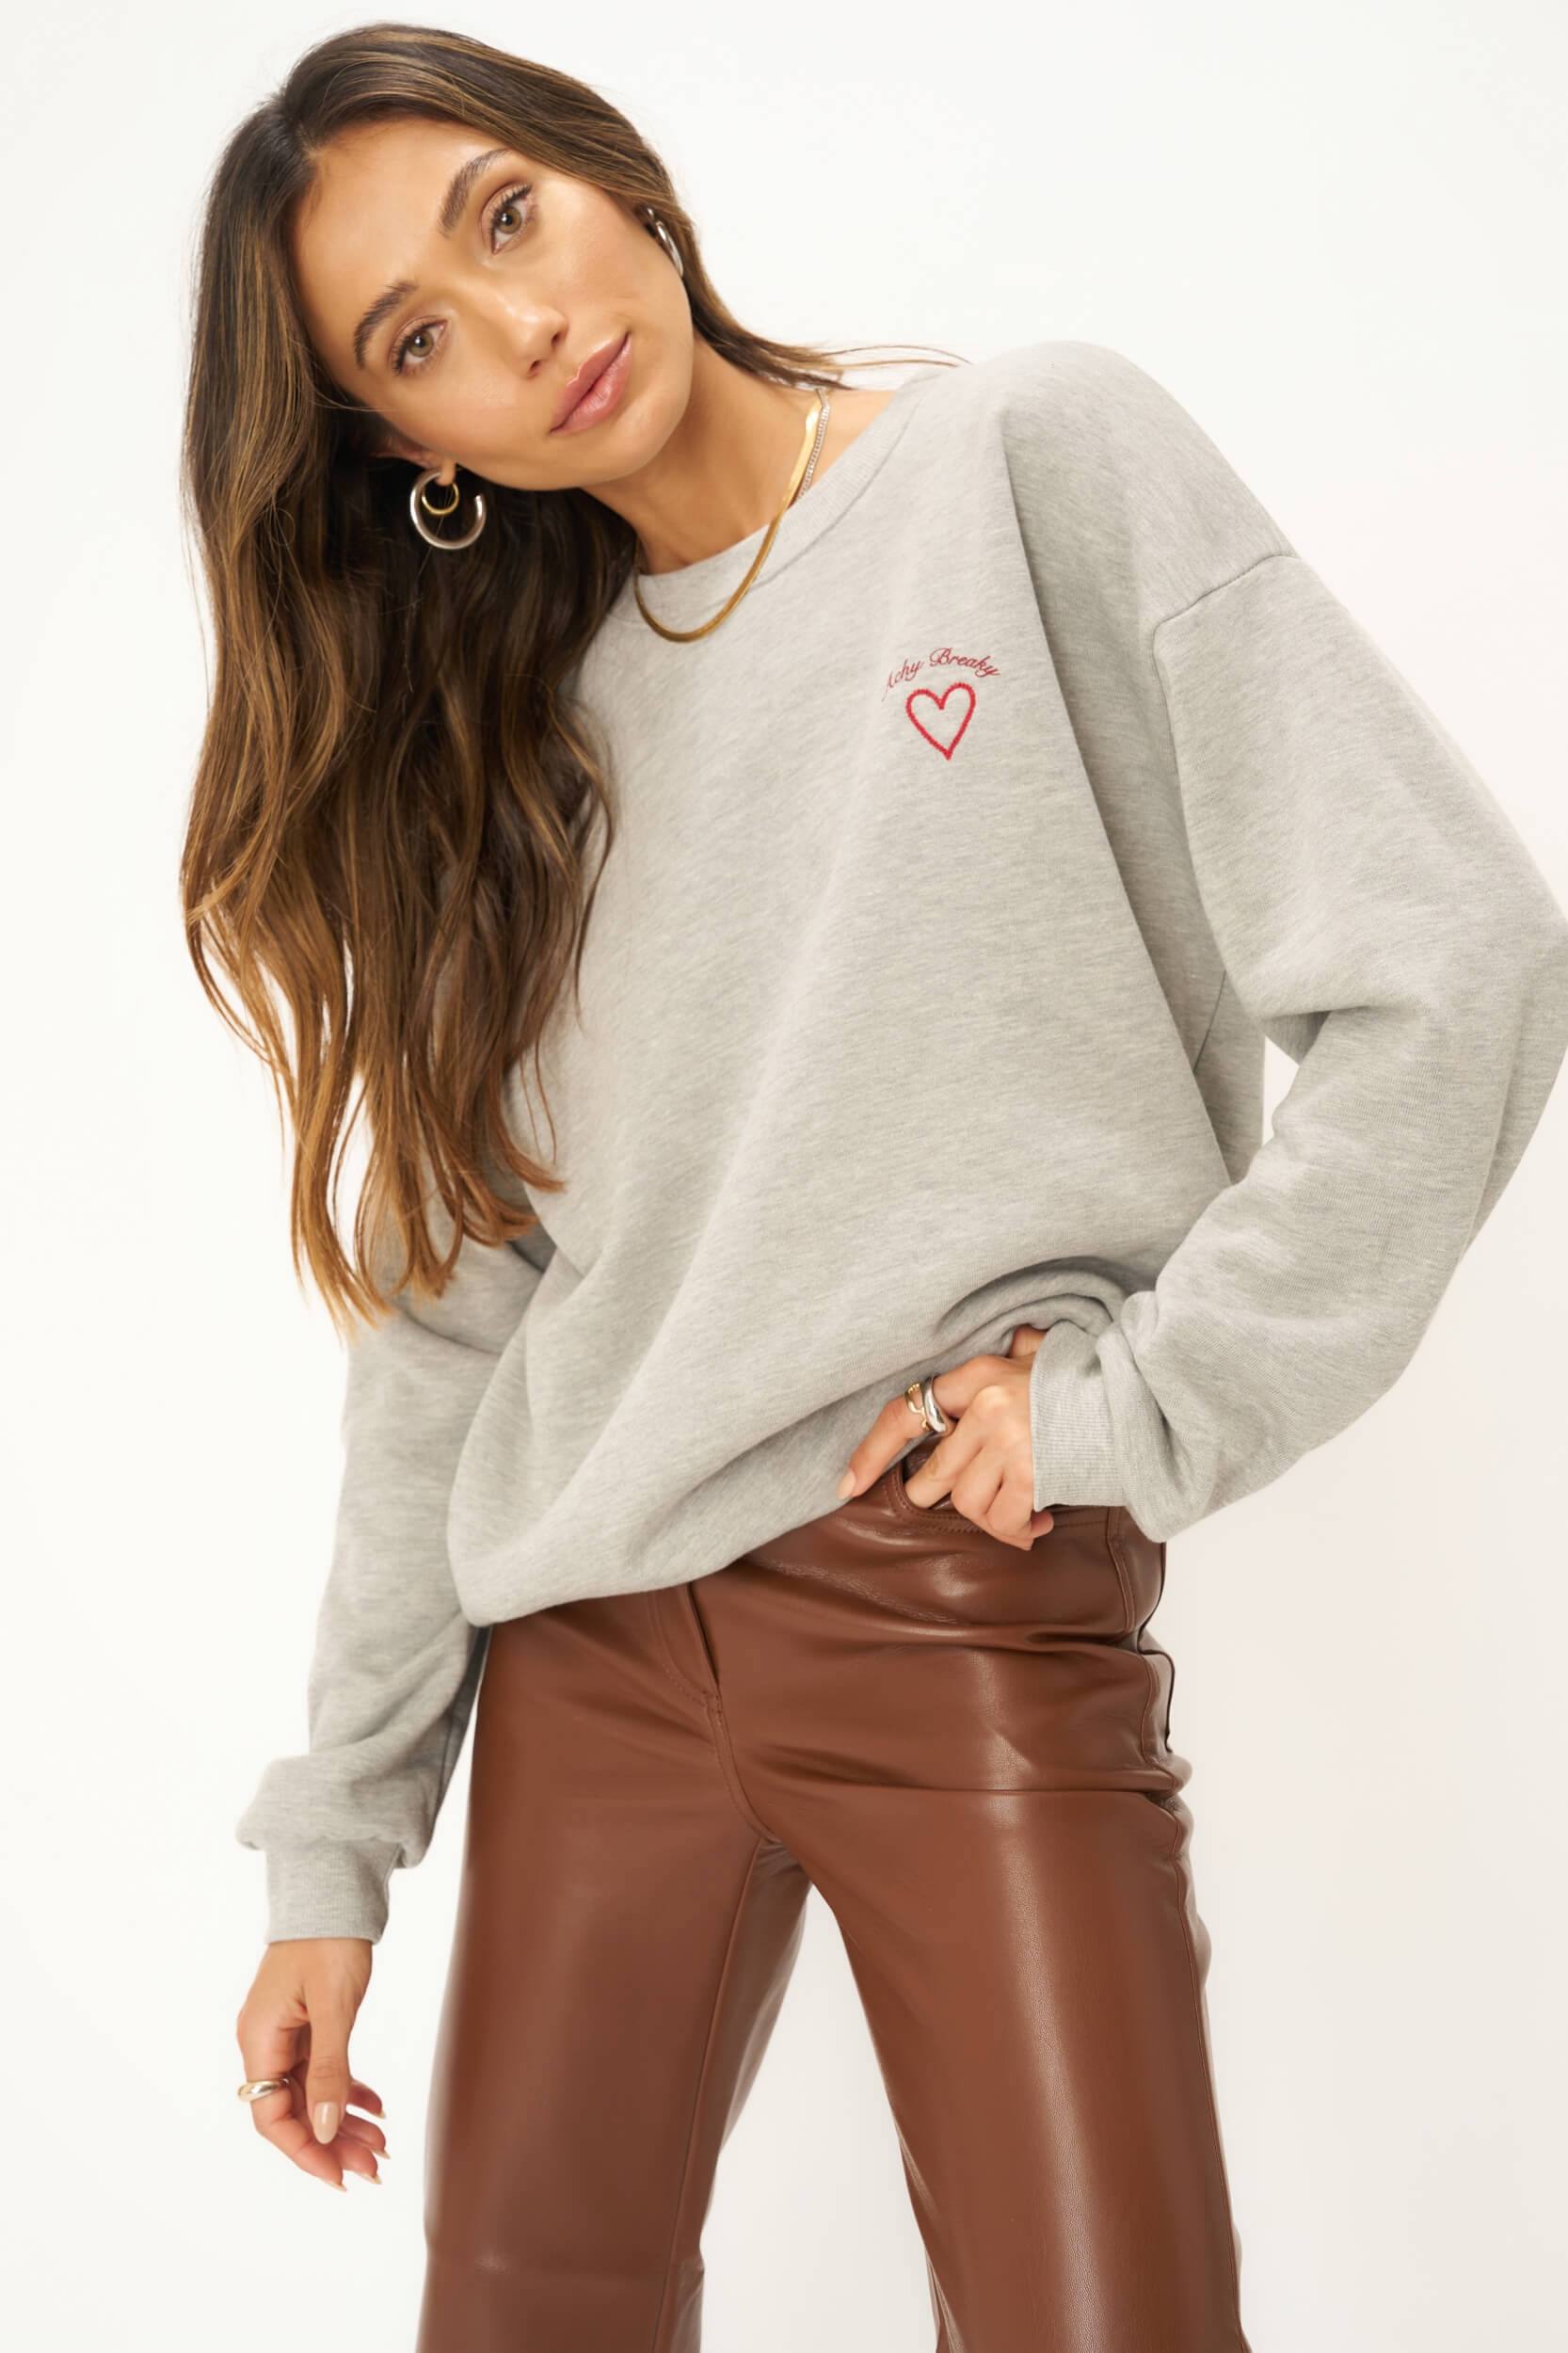 Achy Breaky Embroidered Sweatshirt SOCIAL T – - Grey Heather PROJECT